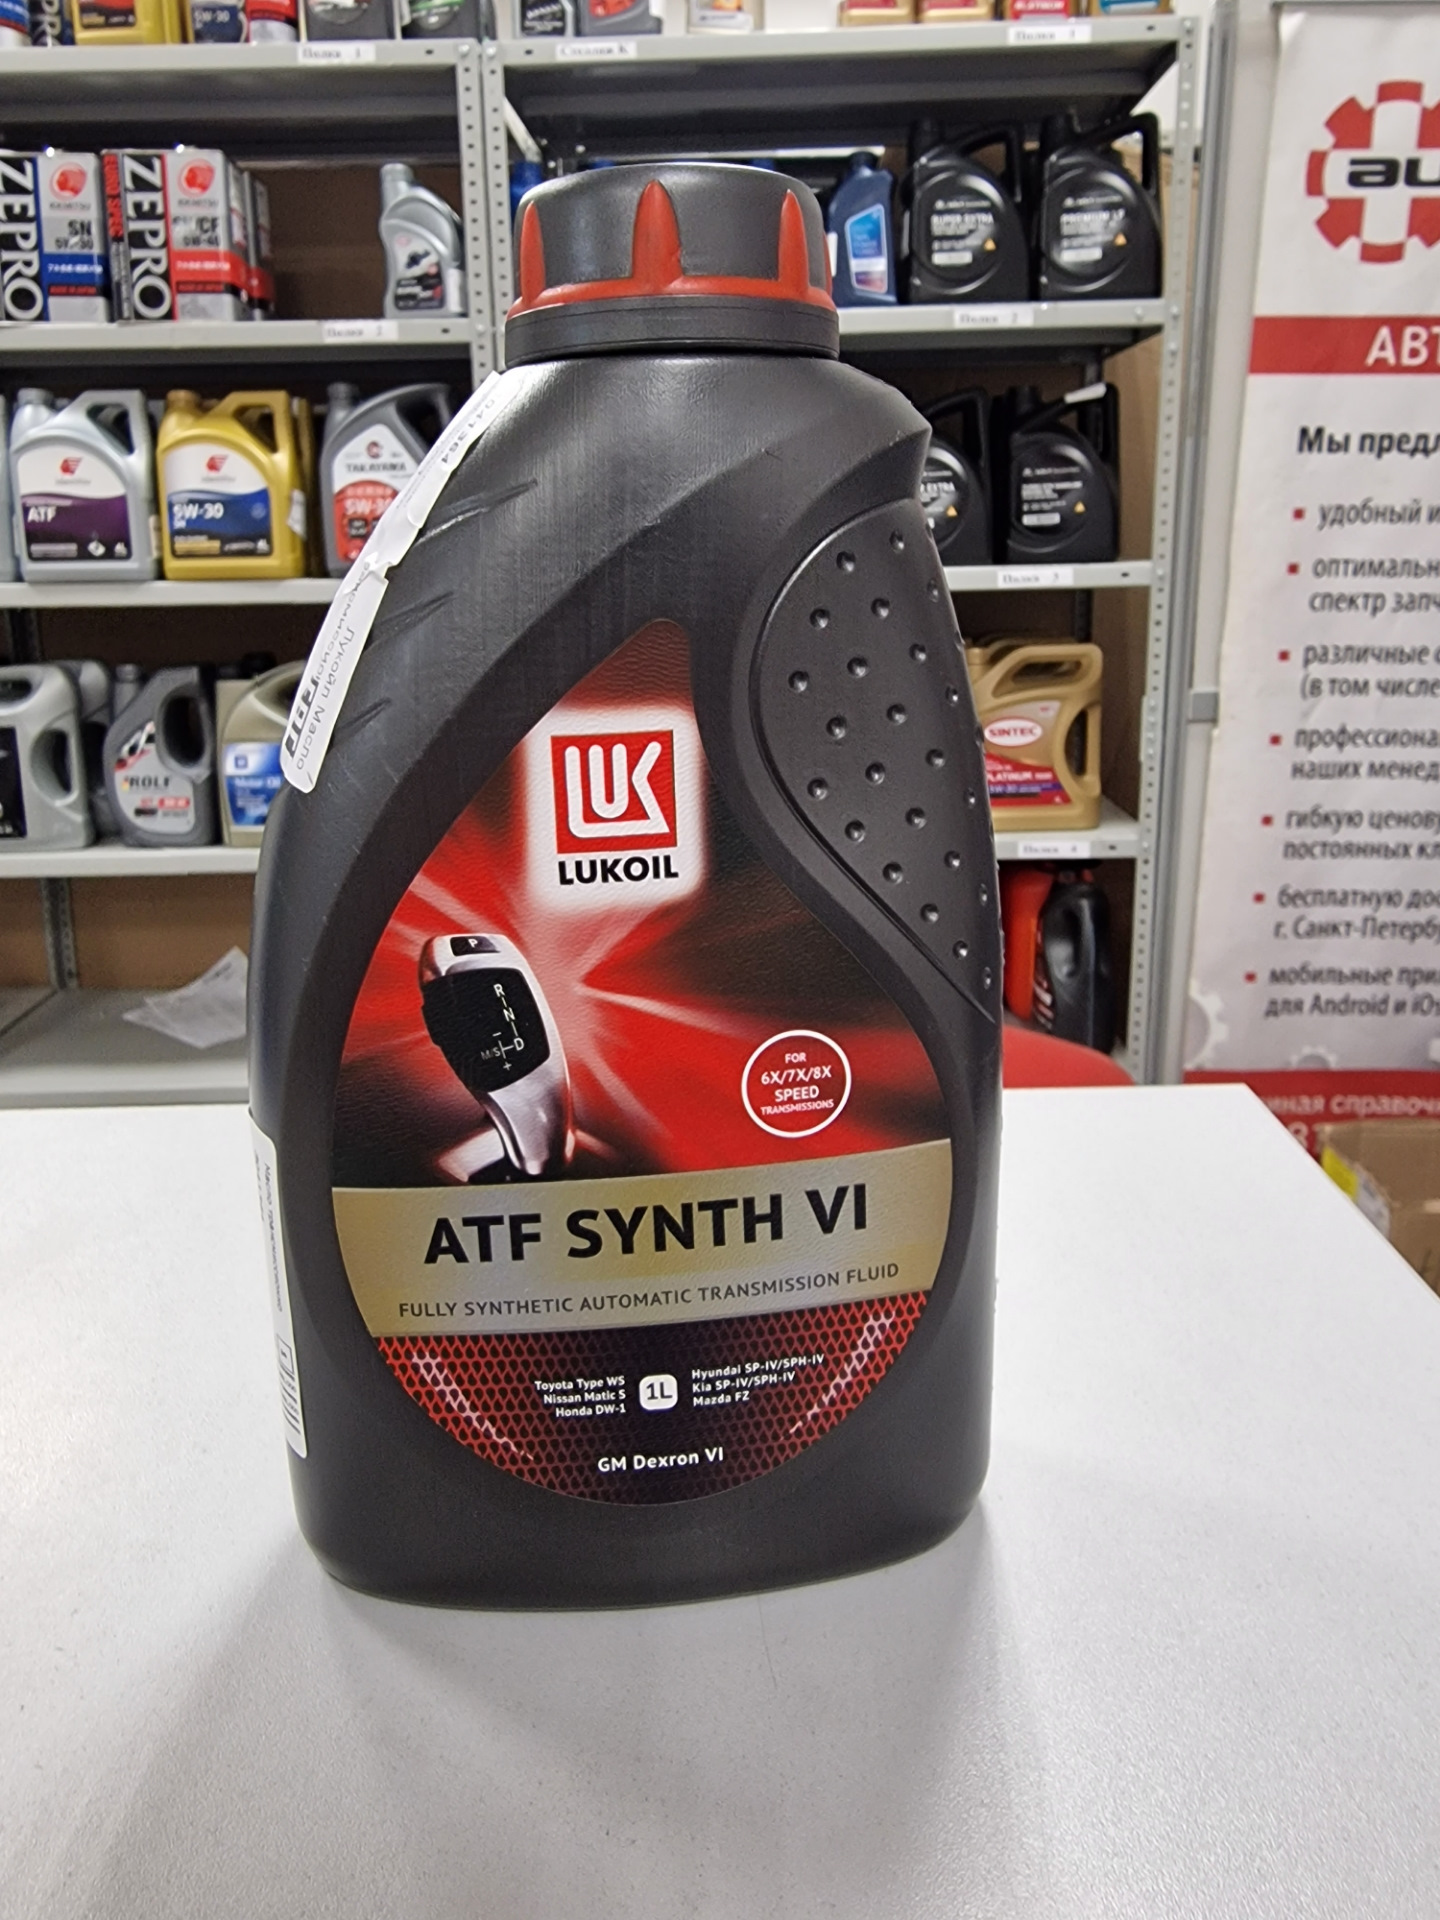 ATF SP-IV Lukoil. ZIC ATF Synth vi. ZIC ATF Synth vi или Лукойл ATF Synth 6.